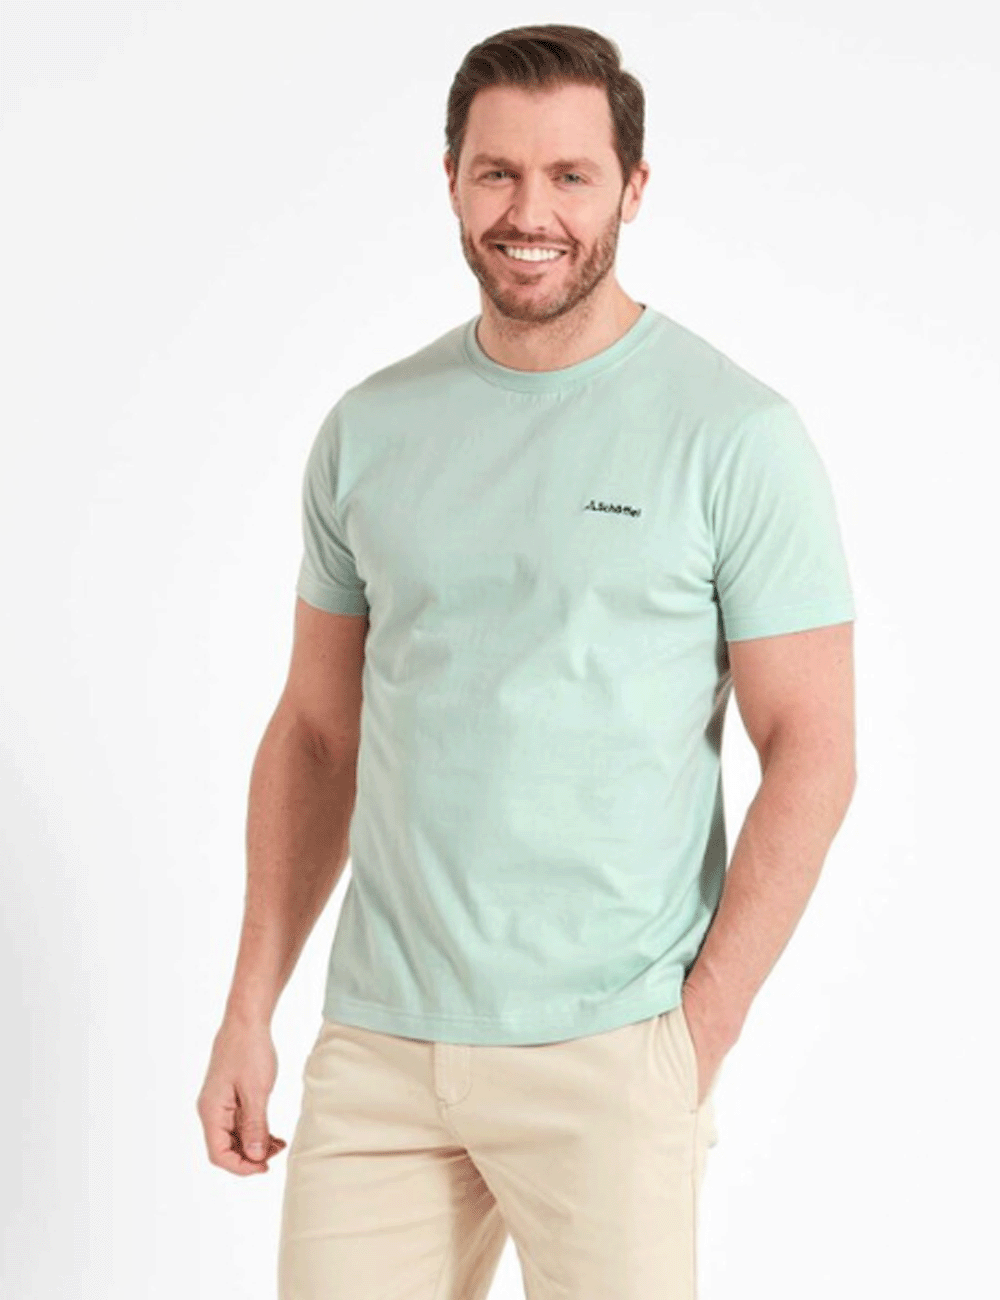 Man wearing the Trevone T-Shirt with beige shorts, his left hand in the front pocket